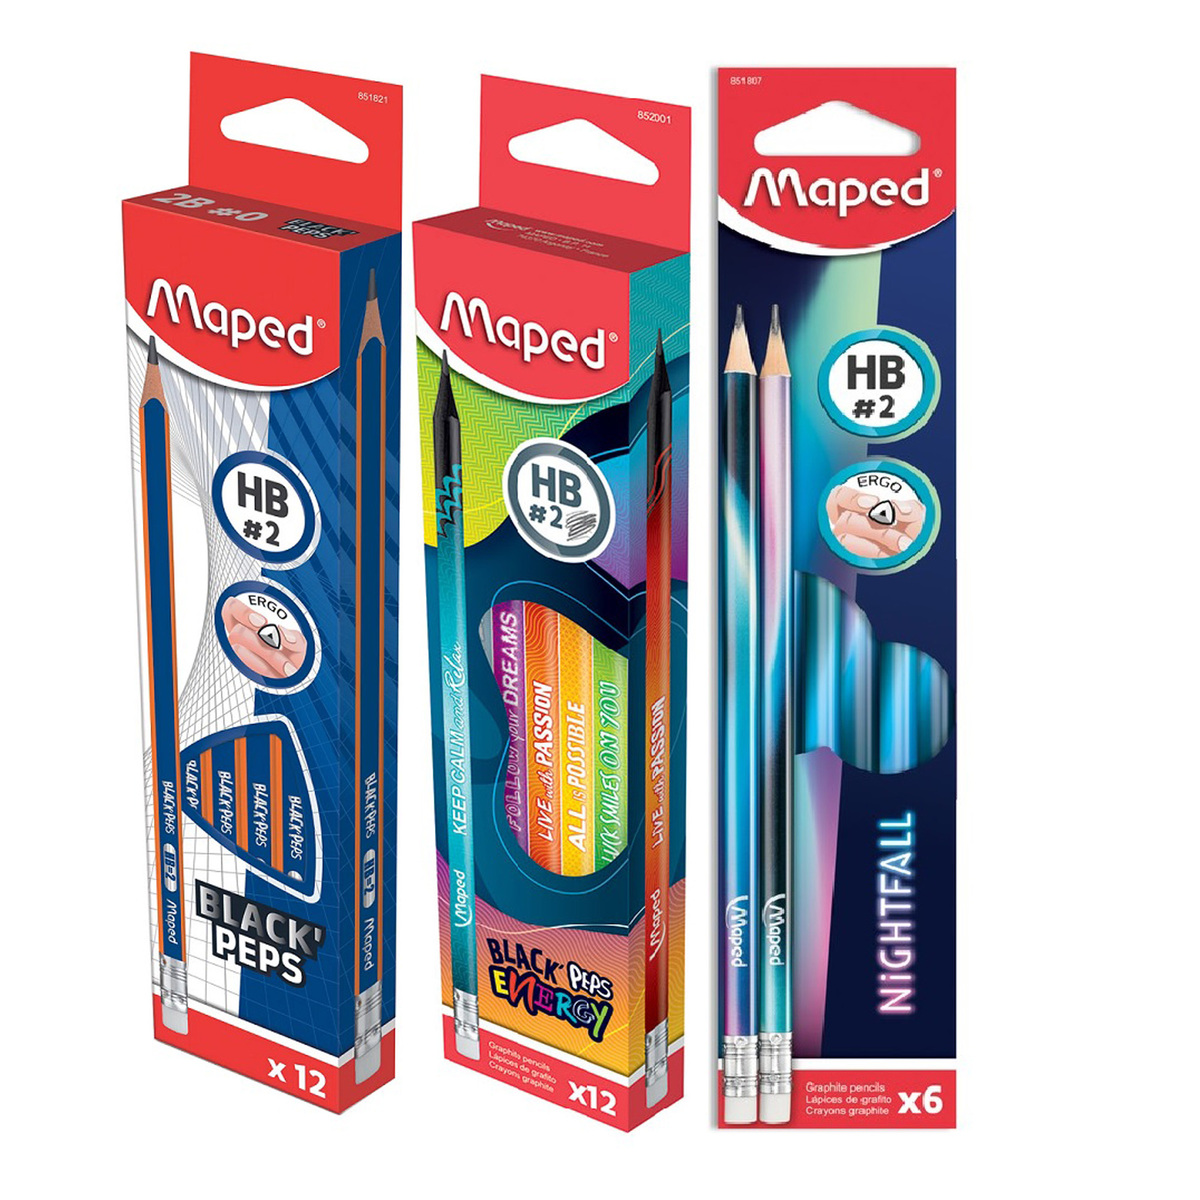 Maped HB Pencil 3Packets MDP-153 Assorted